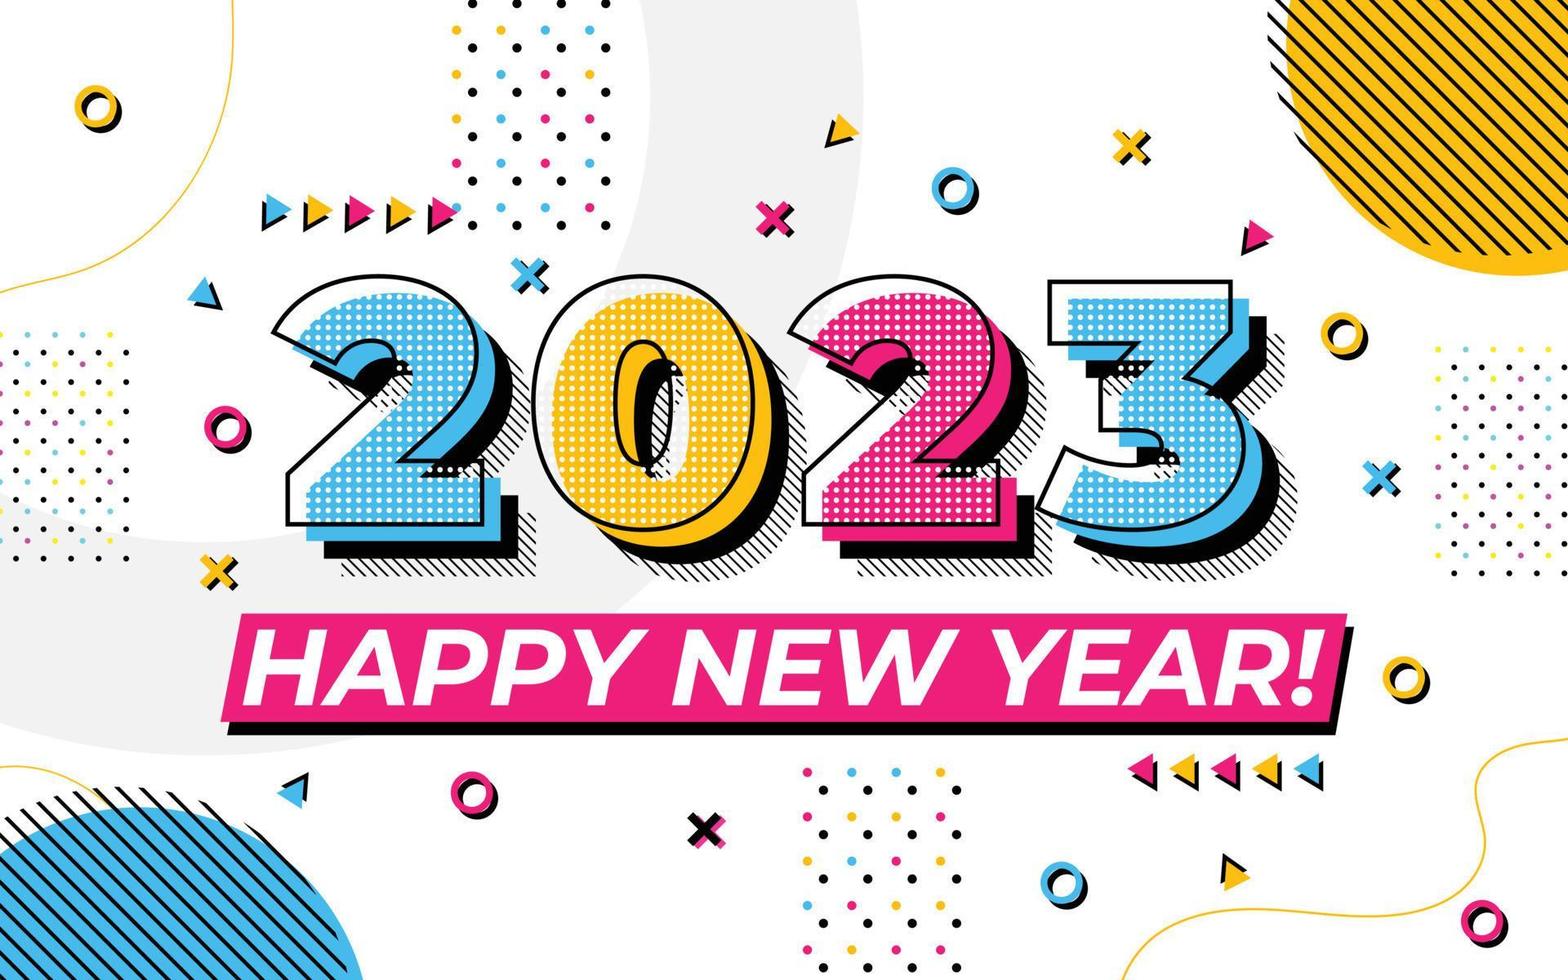 Happy new year 2023 greeting card template, Trendy typography with geometric hipster pattern in Memphis style, 2023 logo background, Applicable for banner, calendar, invitation, flyer, social media vector